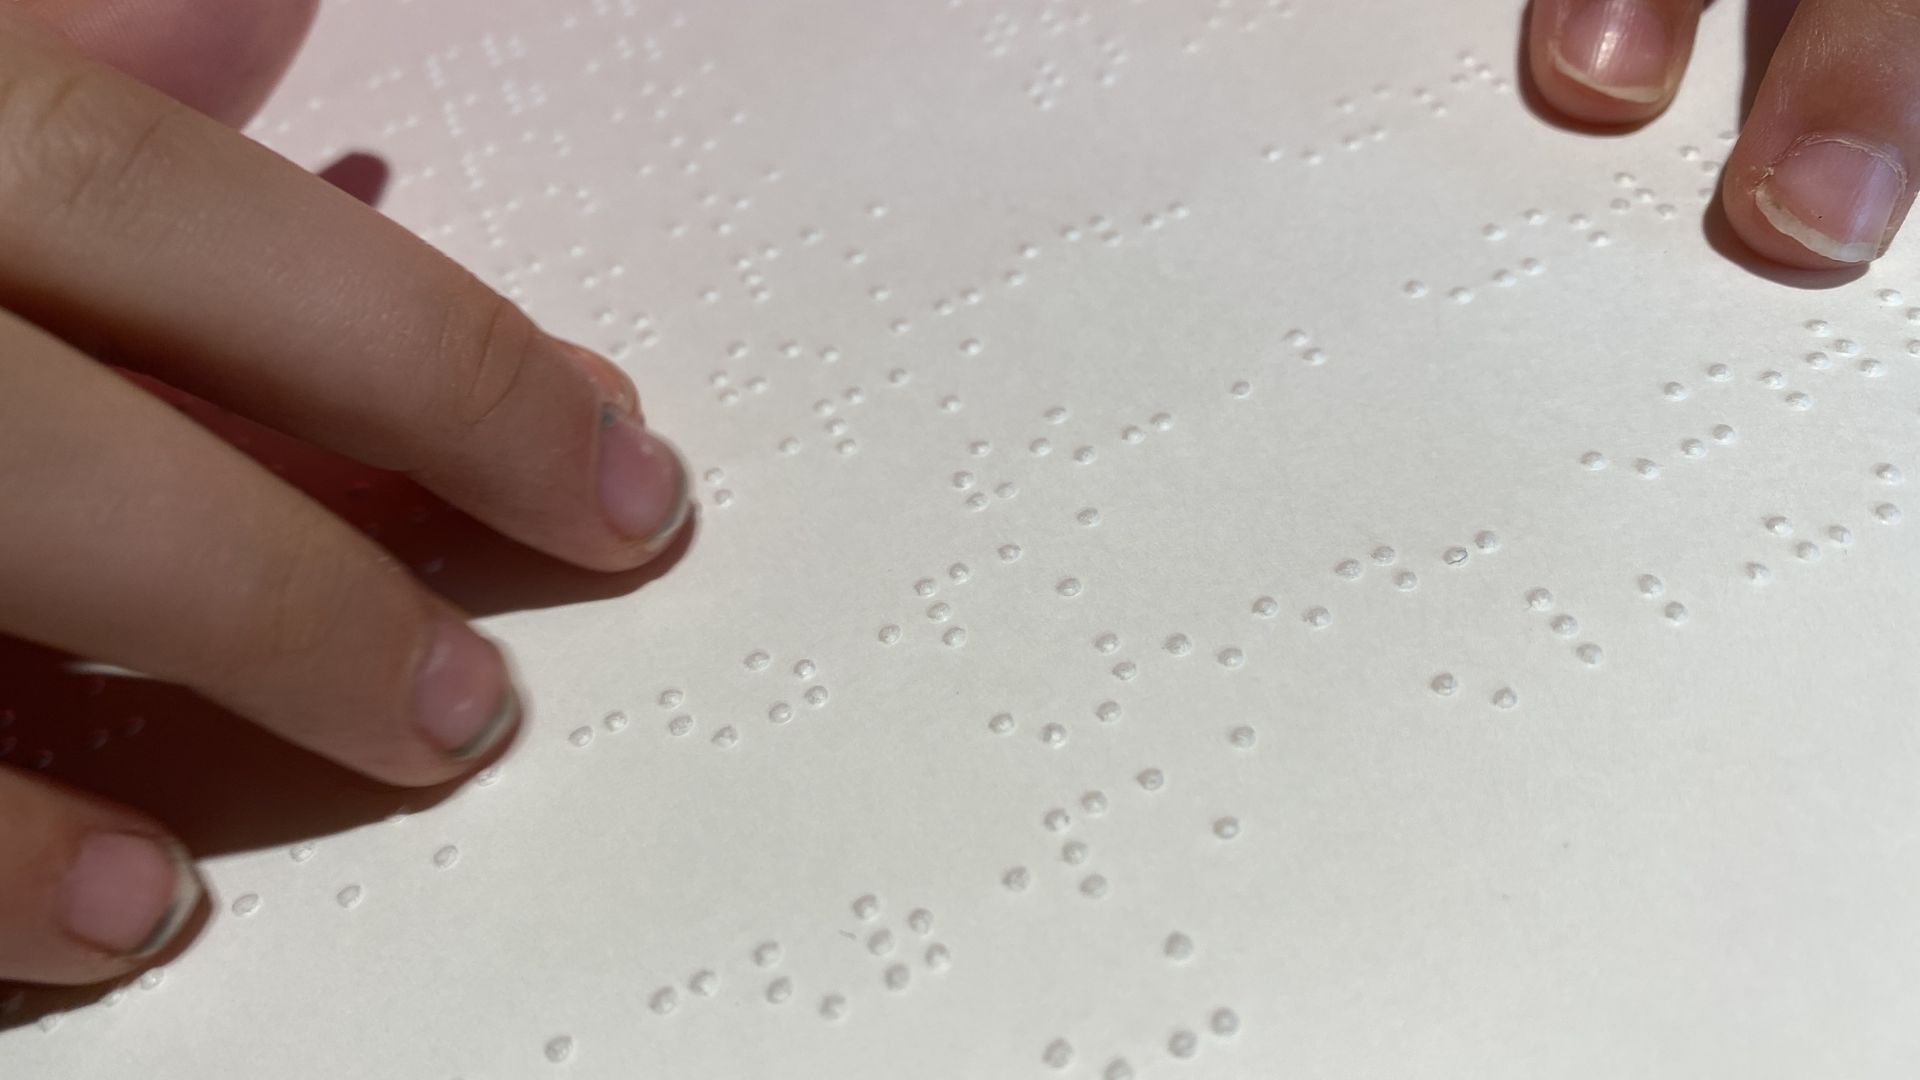 Braille, a basic tool, is rarely used in public places